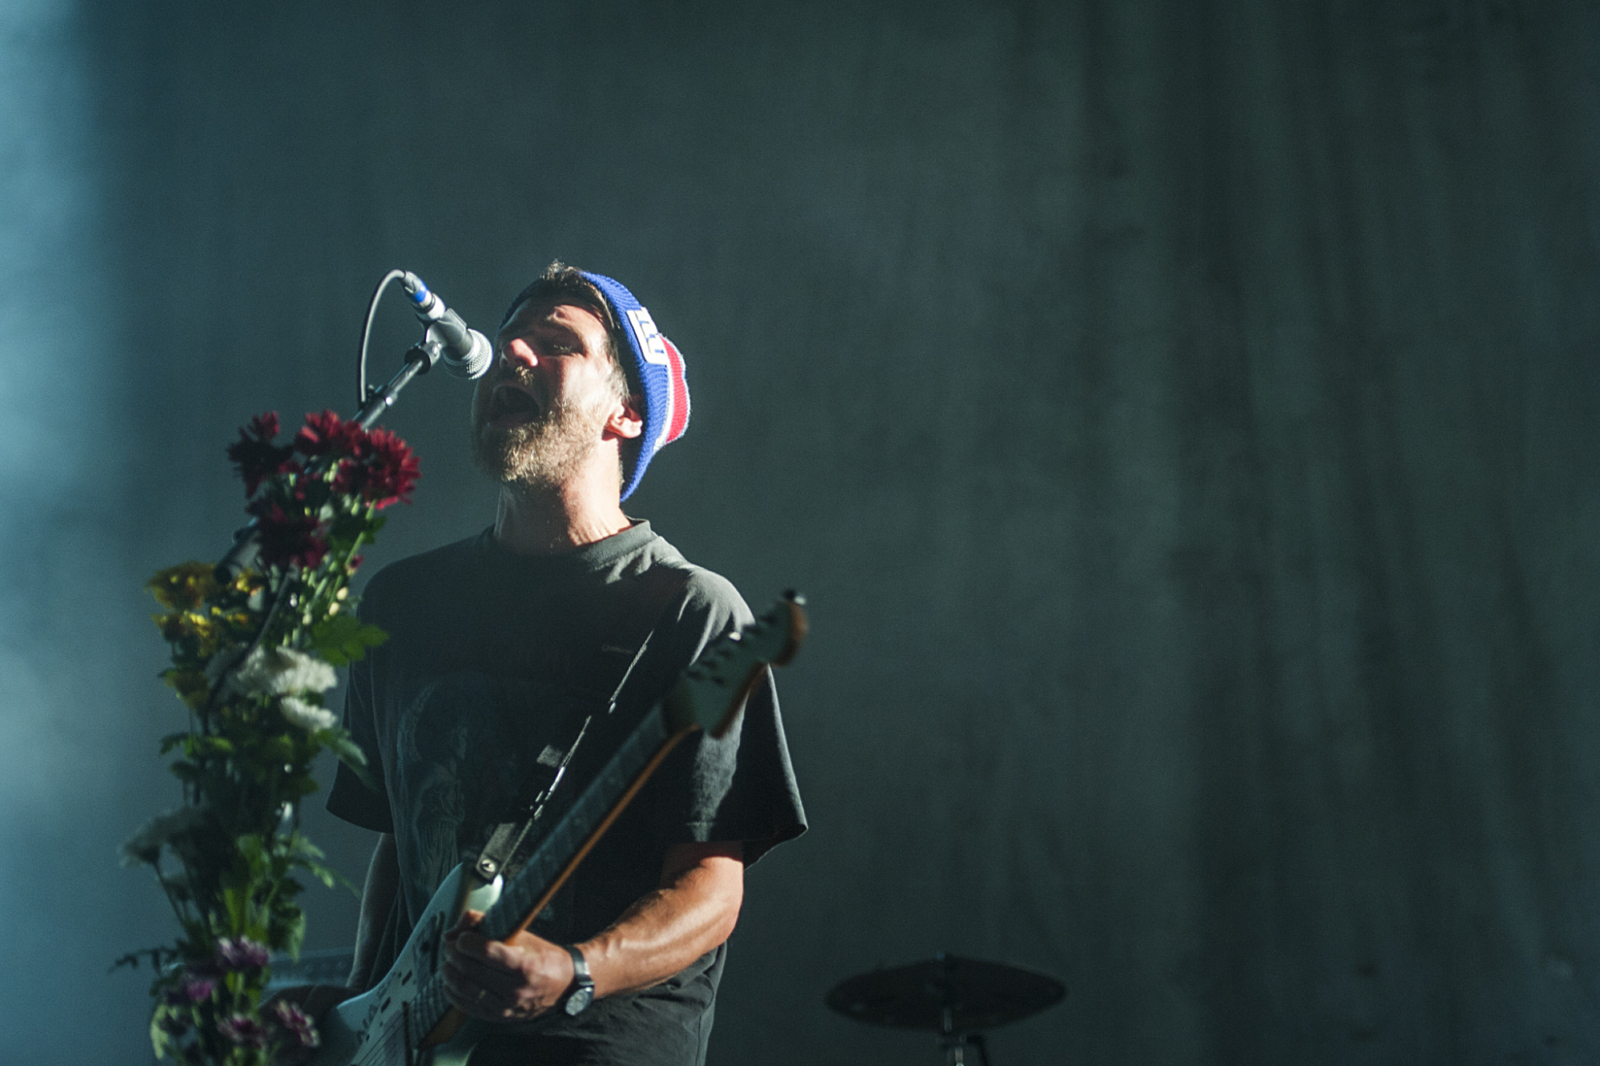 Watch Brand New play songs from 'Science Fiction' for the first time